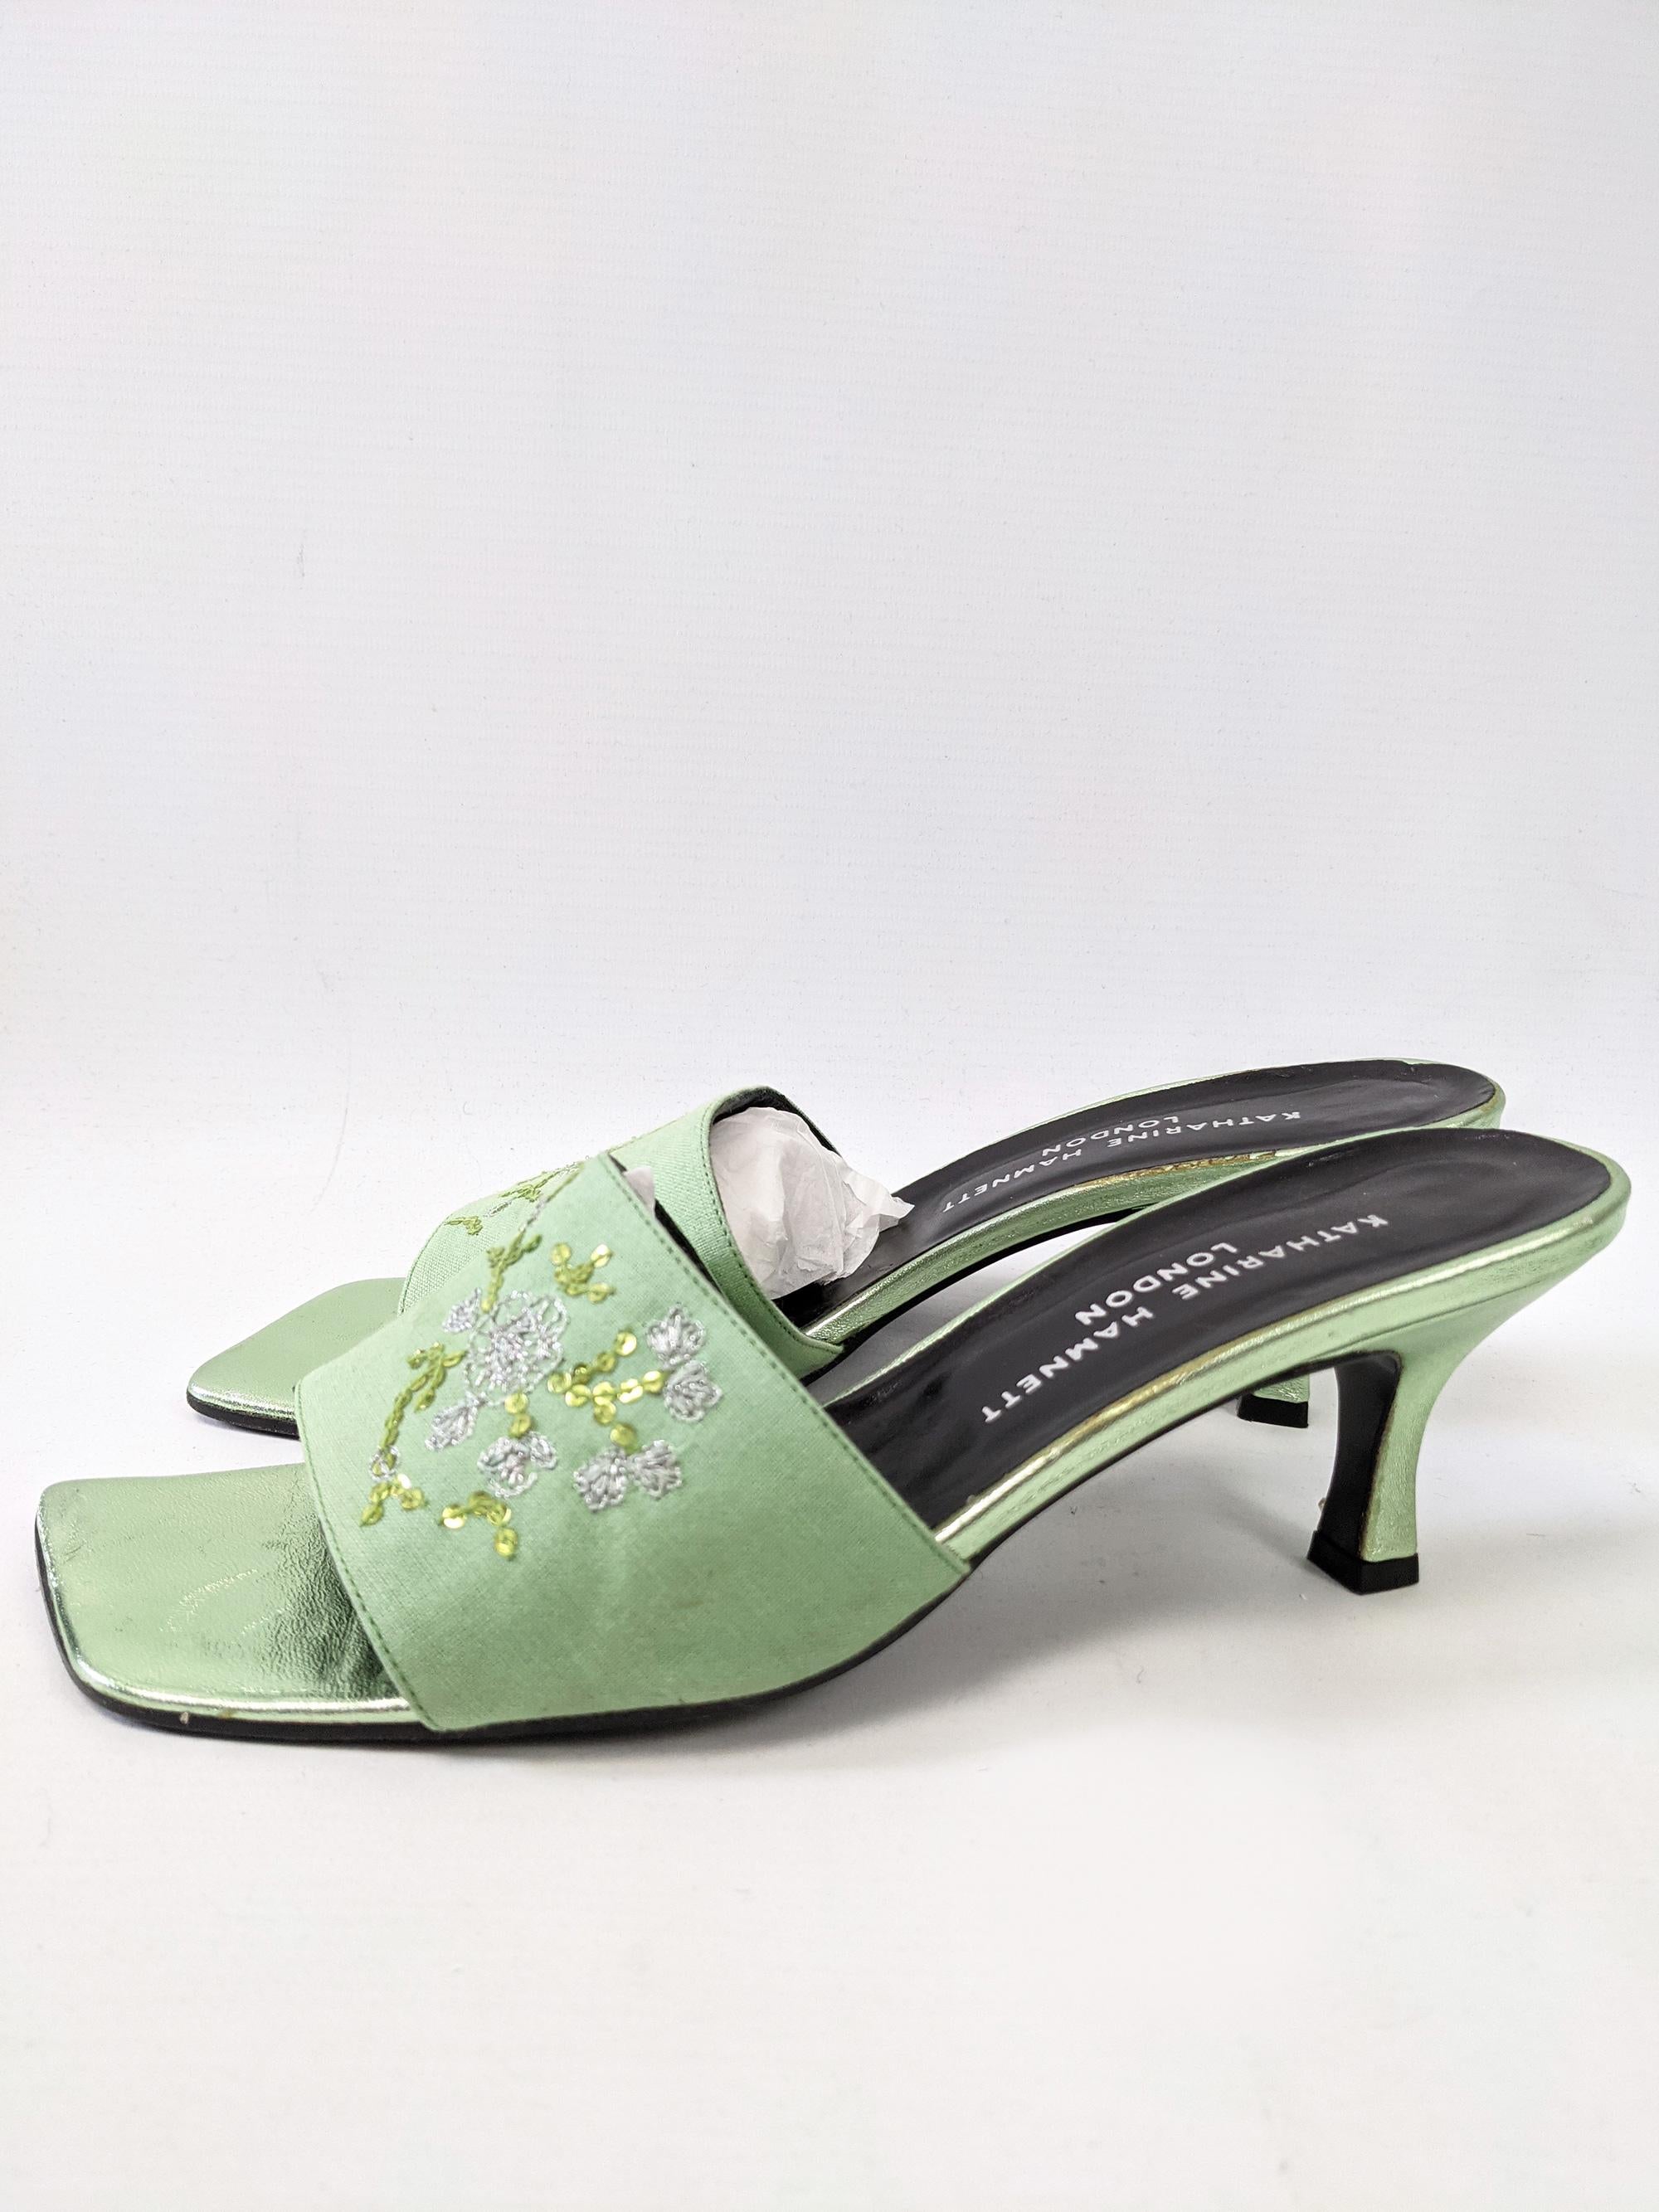 Katharine Hamnett Vintage Sequin Embroidered 1990s Low Heel Mules Shoes 40 In Good Condition In Doncaster, South Yorkshire